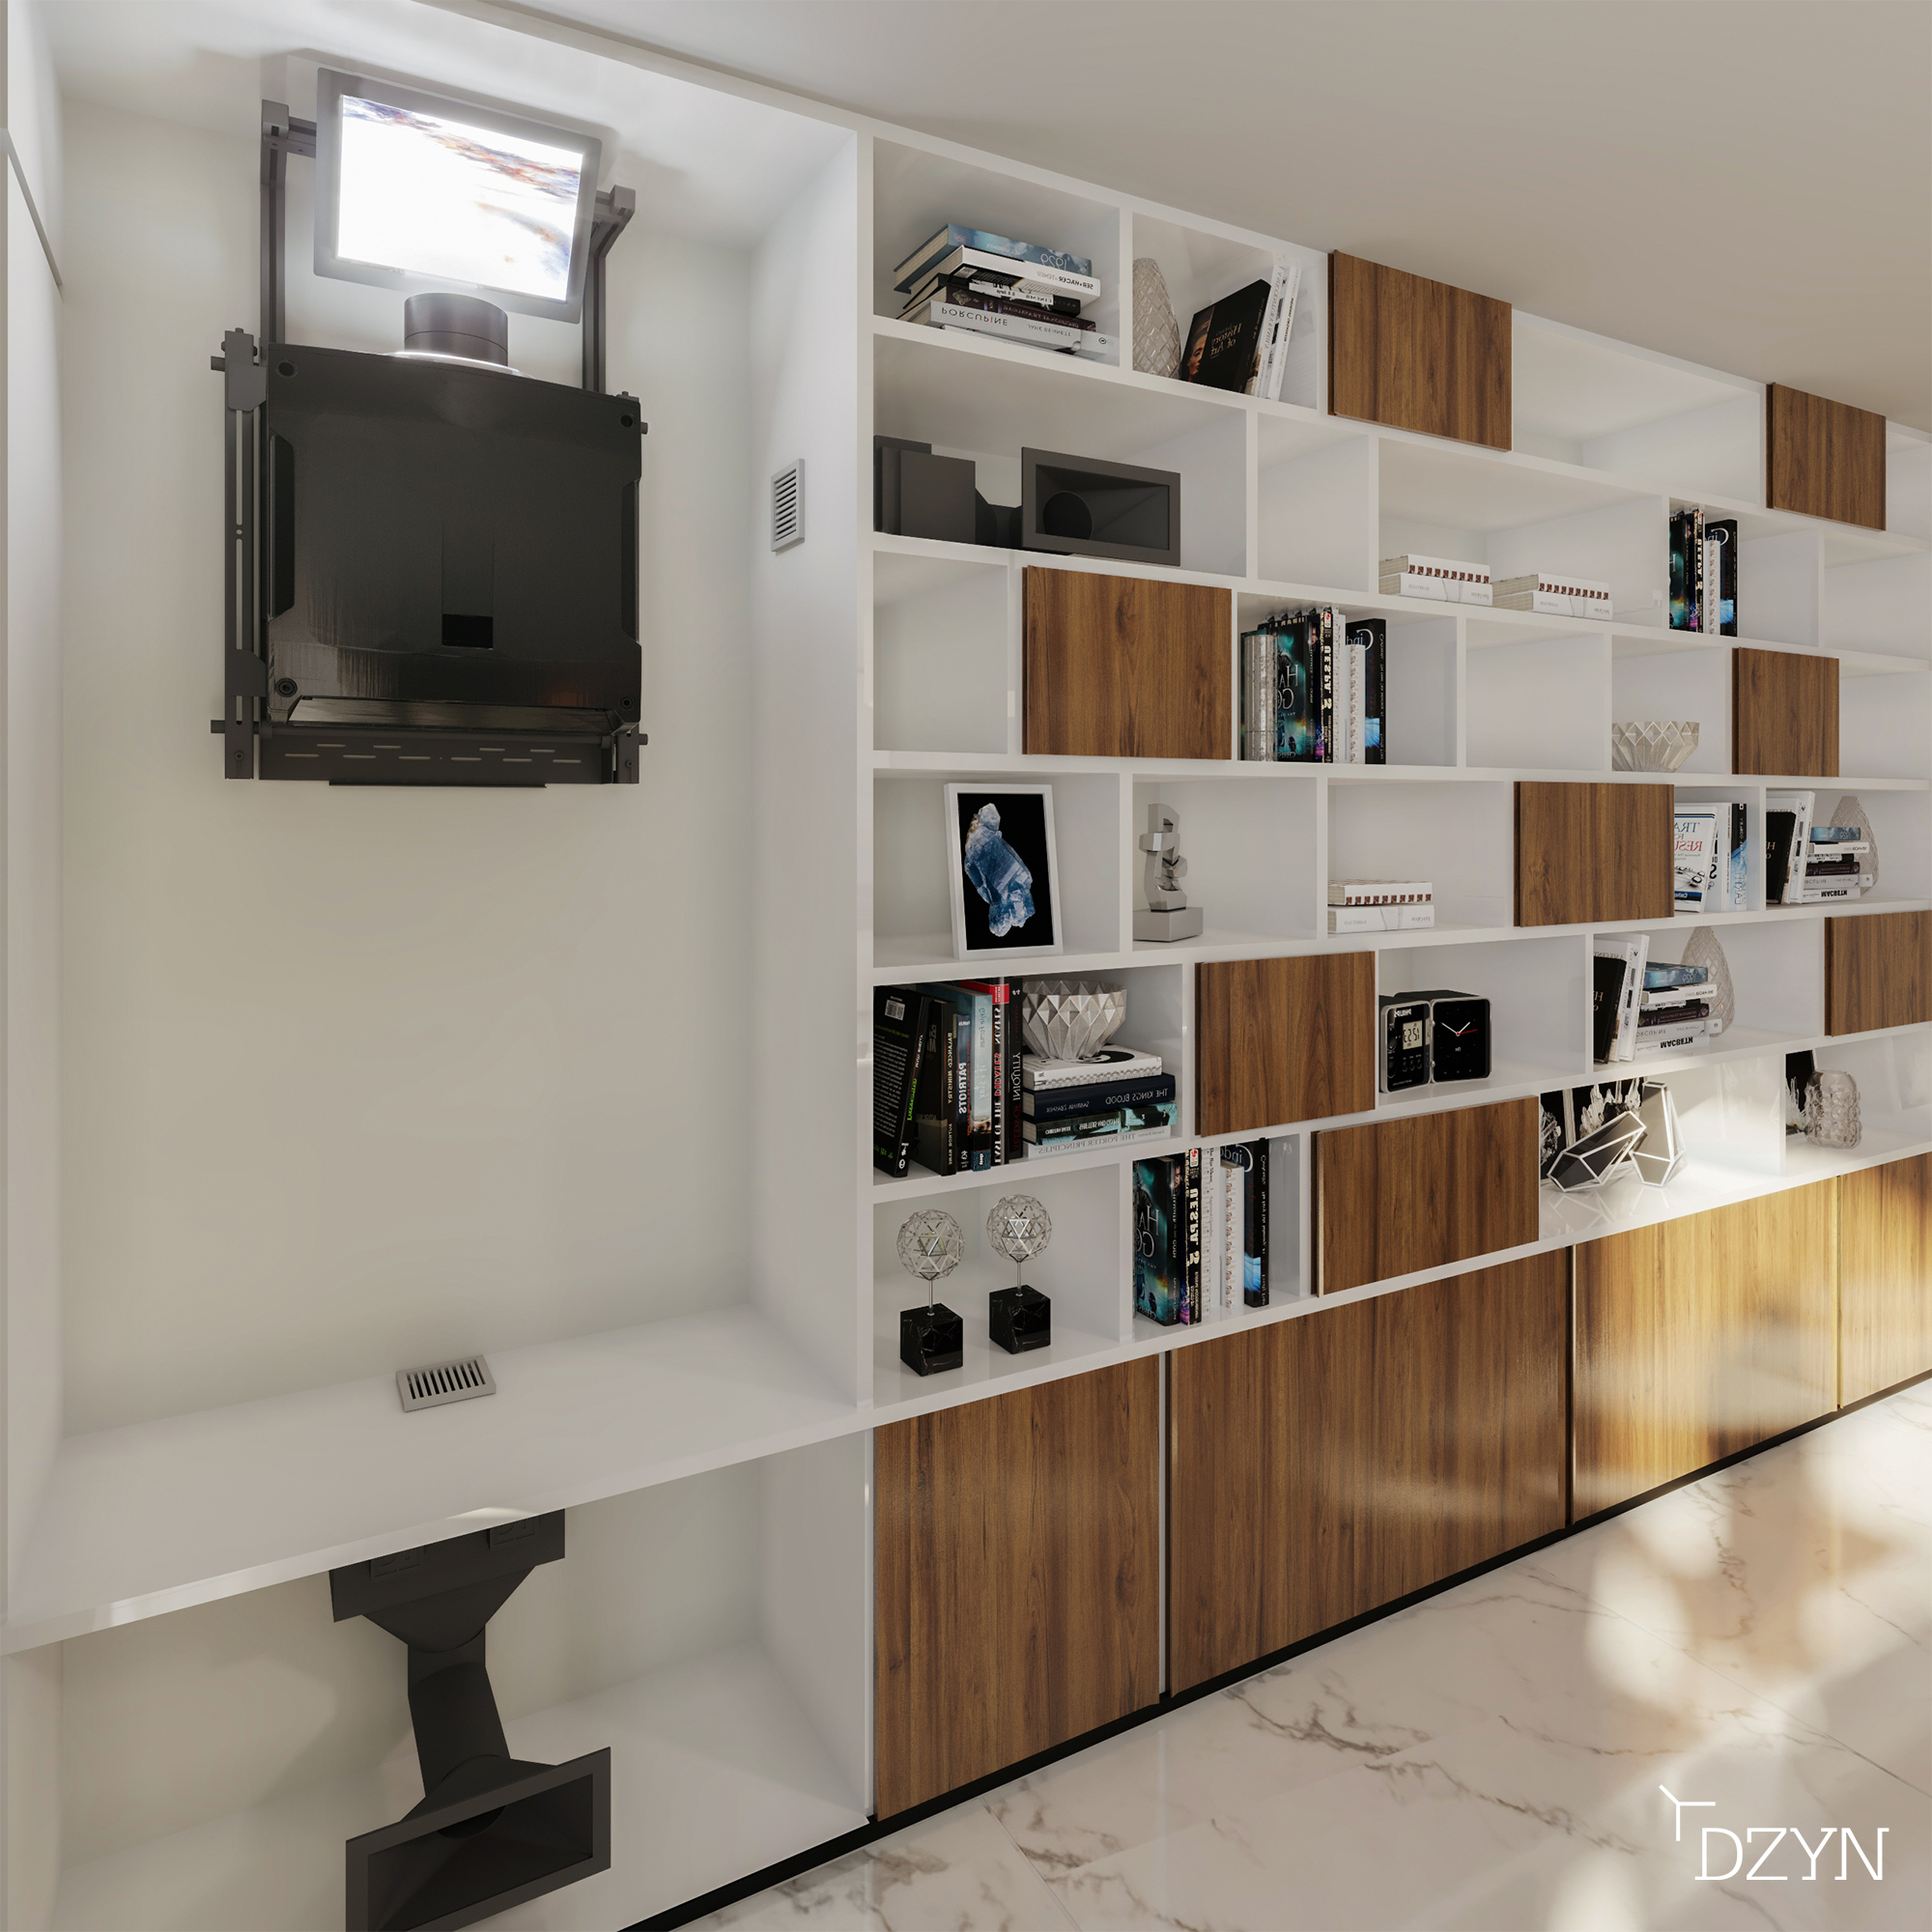 display-technologies-Projector-in-the-cabinet-revealed